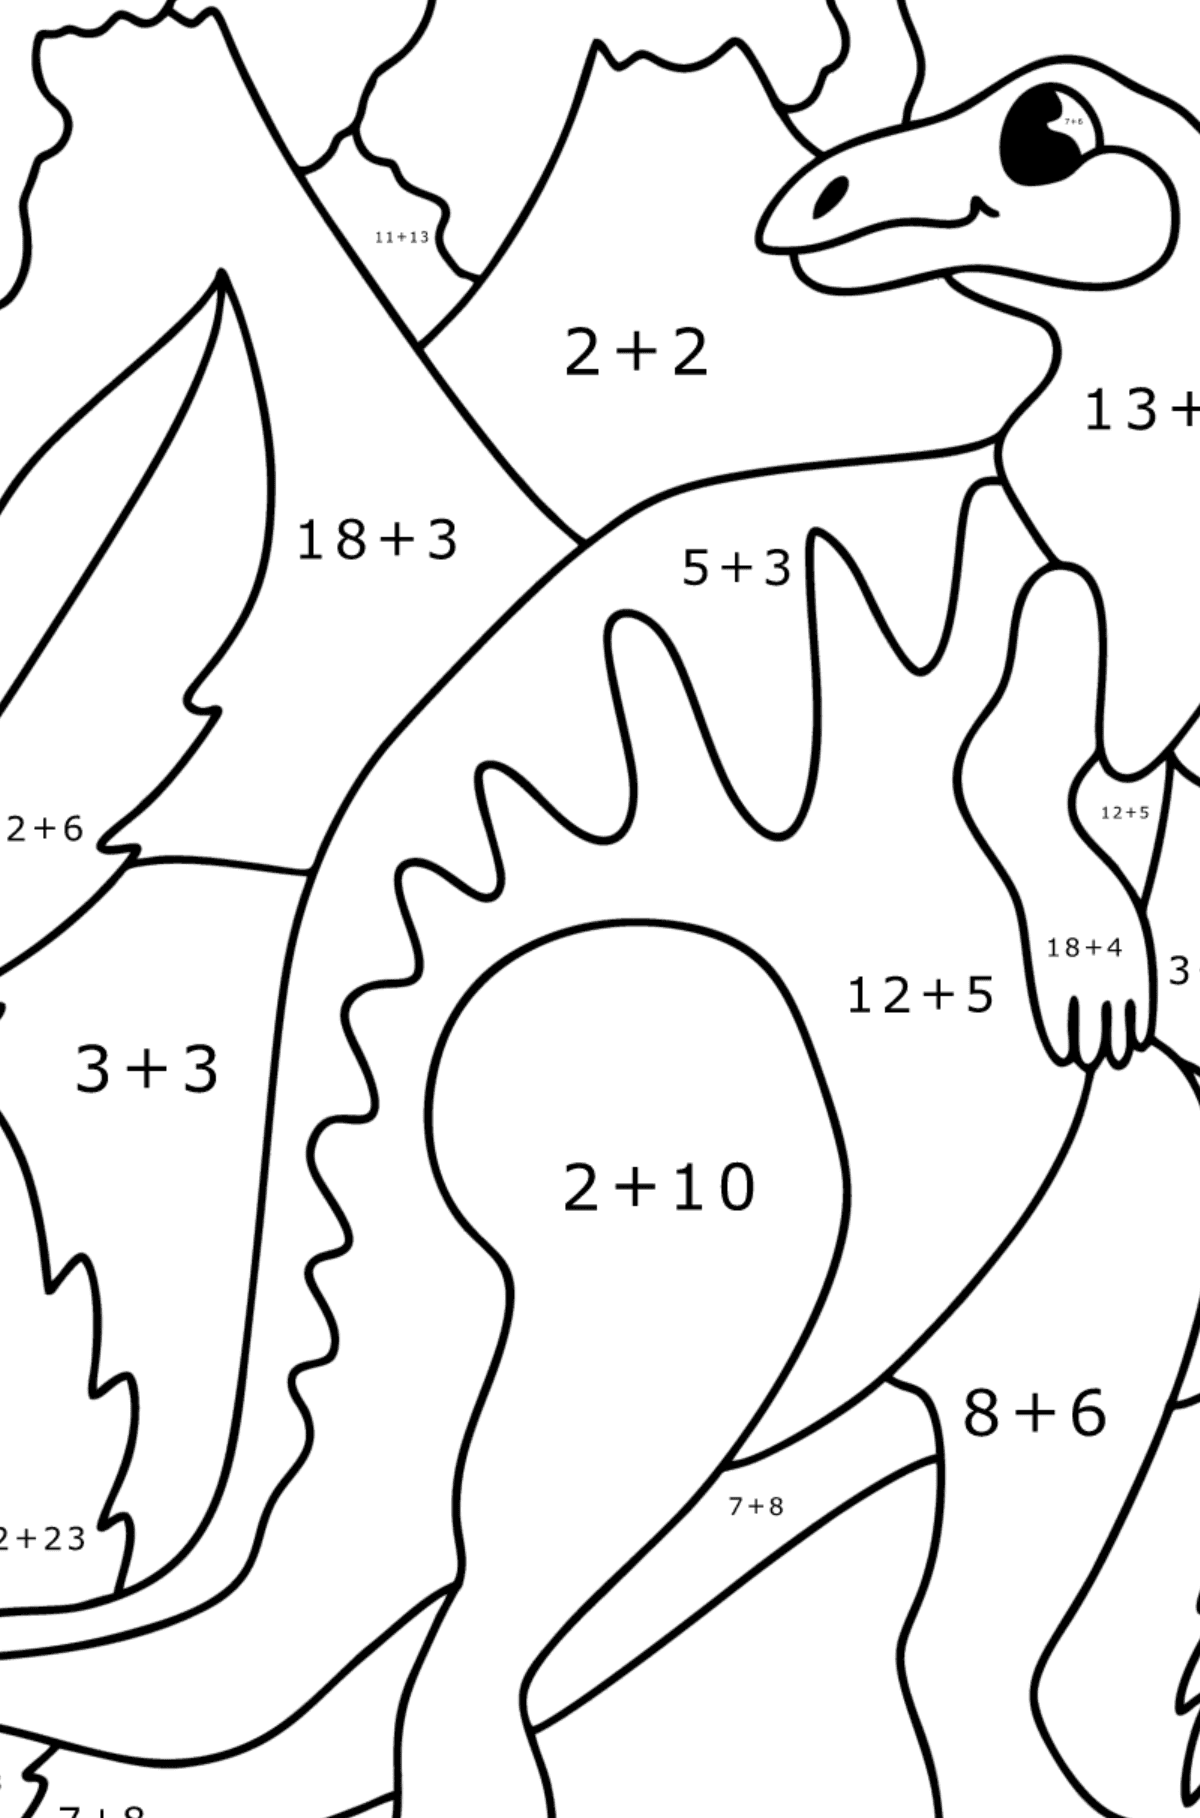 Hadrosaur coloring page - Math Coloring - Addition for Kids